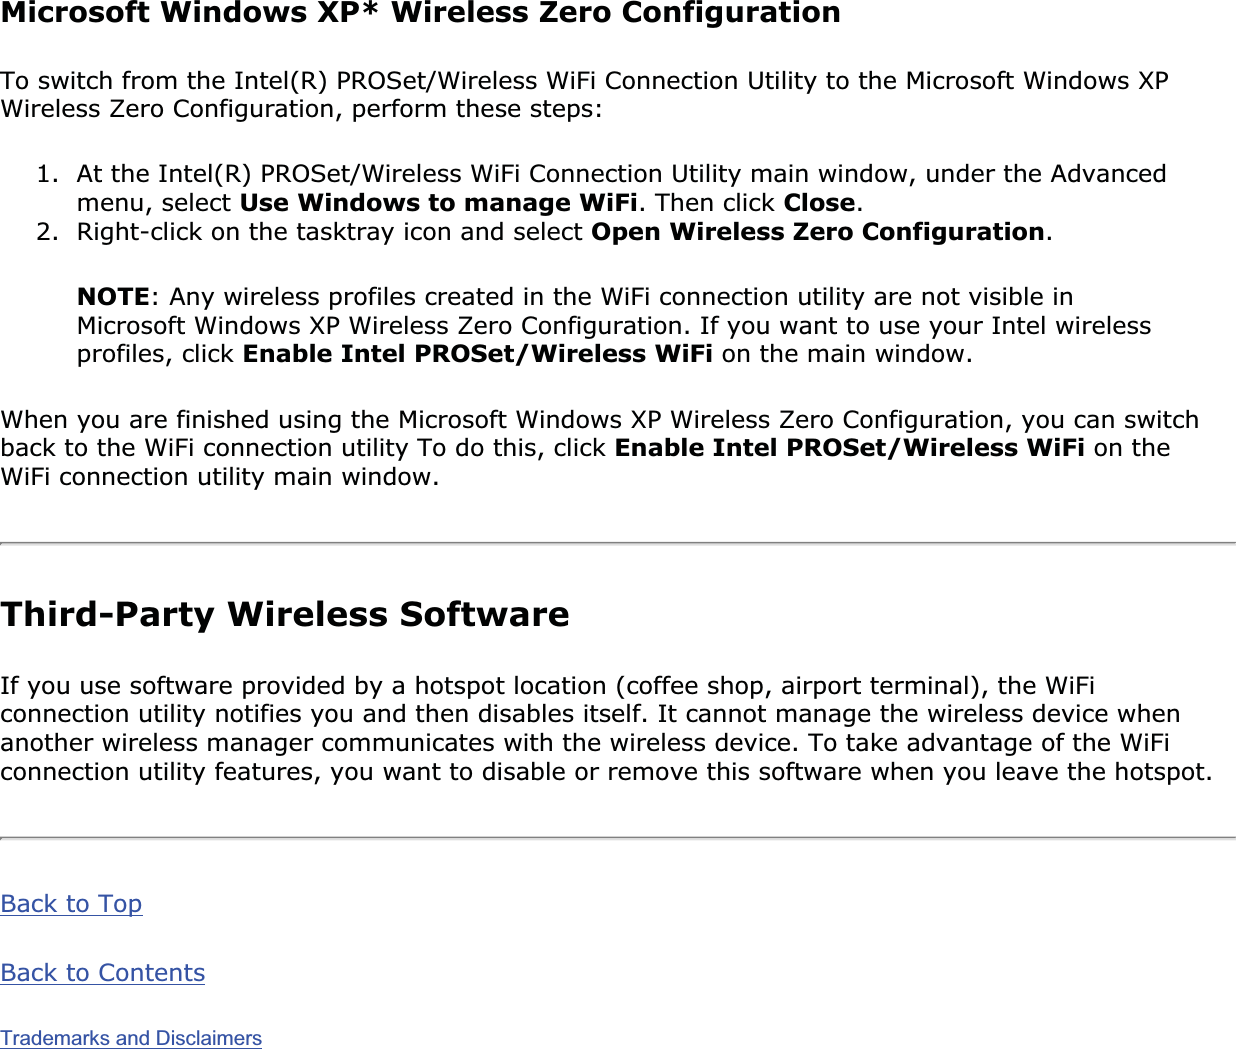 Microsoft Windows XP* Wireless Zero Configuration To switch from the Intel(R) PROSet/Wireless WiFi Connection Utility to the Microsoft Windows XP Wireless Zero Configuration, perform these steps: 1. At the Intel(R) PROSet/Wireless WiFi Connection Utility main window, under the Advanced menu, select Use Windows to manage WiFi. Then click Close.2. Right-click on the tasktray icon and select Open Wireless Zero Configuration.NOTE: Any wireless profiles created in the WiFi connection utility are not visible in Microsoft Windows XP Wireless Zero Configuration. If you want to use your Intel wireless profiles, click Enable Intel PROSet/Wireless WiFi on the main window.When you are finished using the Microsoft Windows XP Wireless Zero Configuration, you can switch back to the WiFi connection utility To do this, click Enable Intel PROSet/Wireless WiFi on the WiFi connection utility main window. Third-Party Wireless SoftwareIf you use software provided by a hotspot location (coffee shop, airport terminal), the WiFi connection utility notifies you and then disables itself. It cannot manage the wireless device when another wireless manager communicates with the wireless device. To take advantage of the WiFi connection utility features, you want to disable or remove this software when you leave the hotspot. Back to TopBack to ContentsTrademarks and Disclaimers